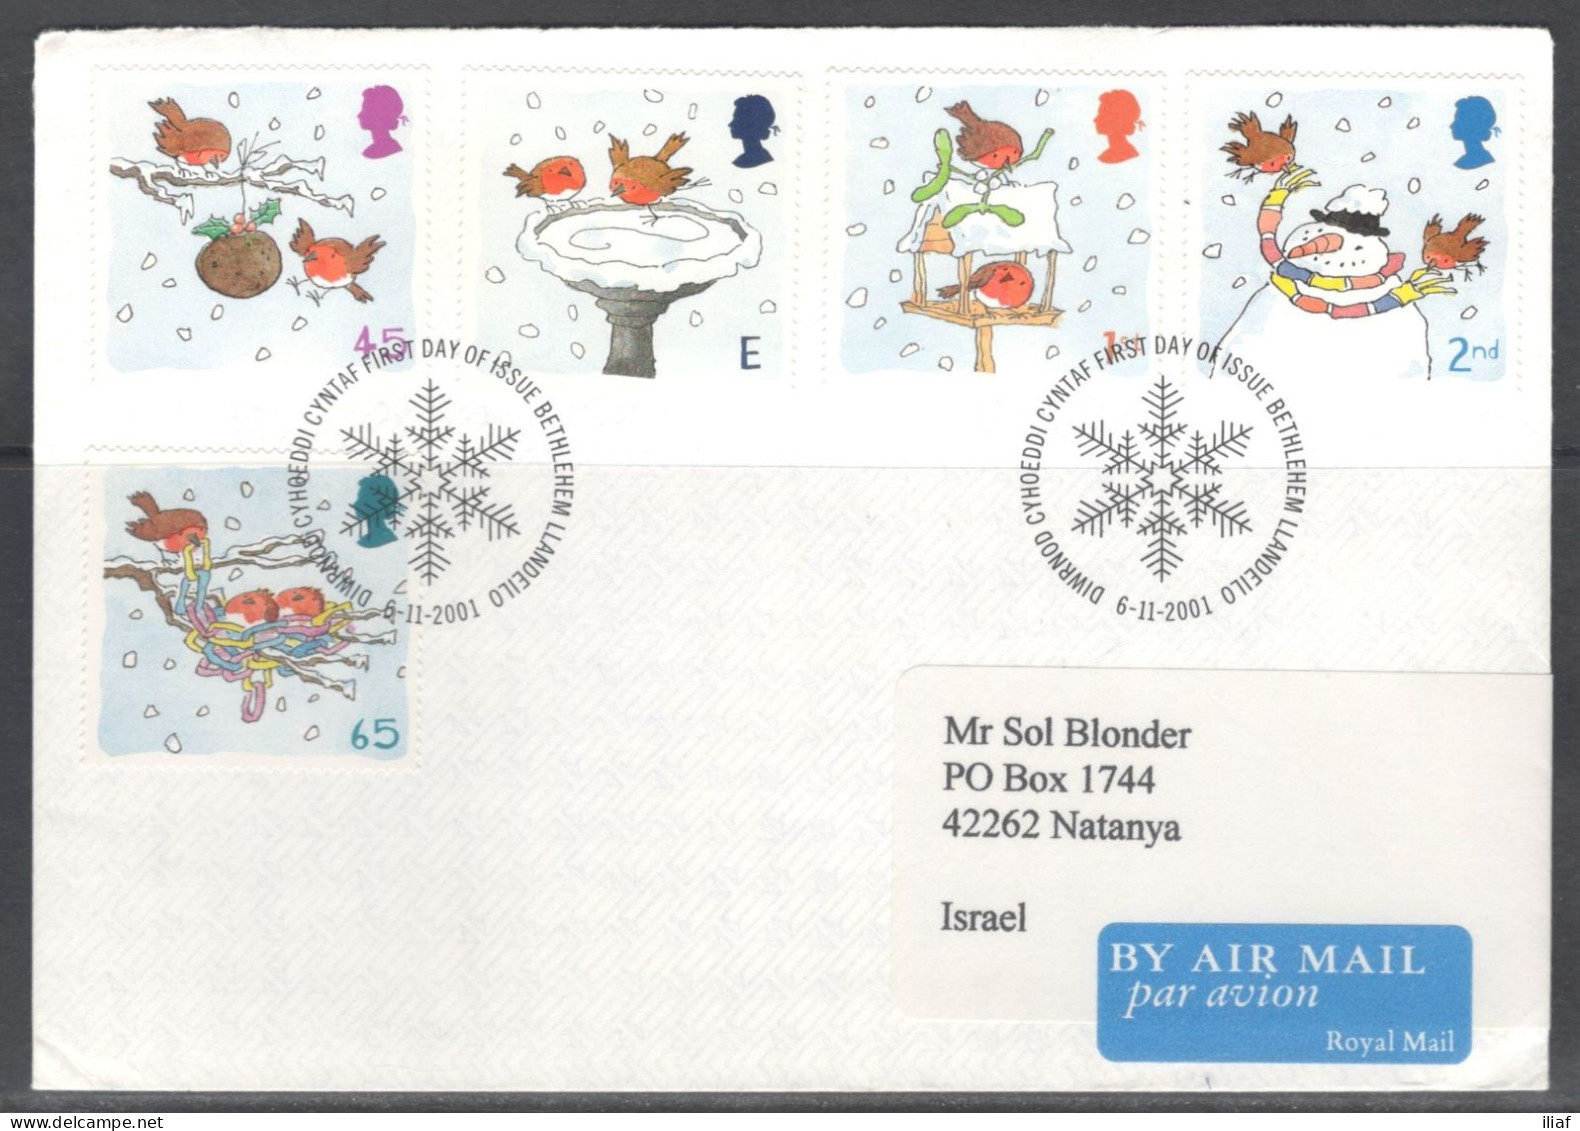 United Kingdom Of Great Britain.  FDC Sc. 2002-2006.  Christmas 2001 - Robins.  FDC Cancellation On Plain Envelope - 1981-1990 Decimale Uitgaven